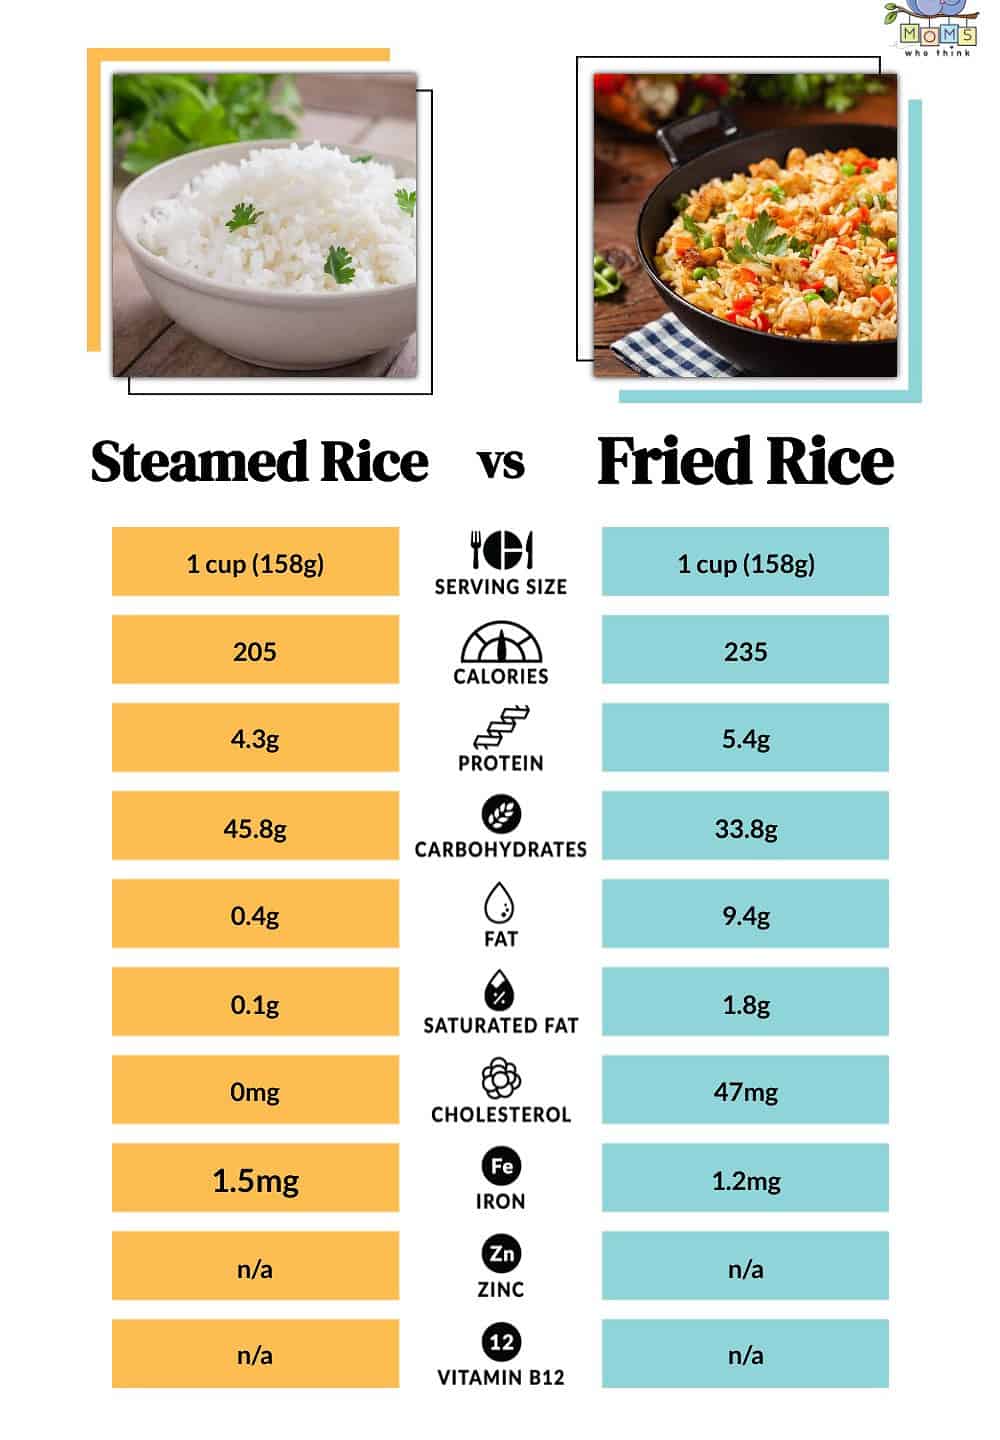 Steamed Rice vs Fried Rice Nutritional Facts